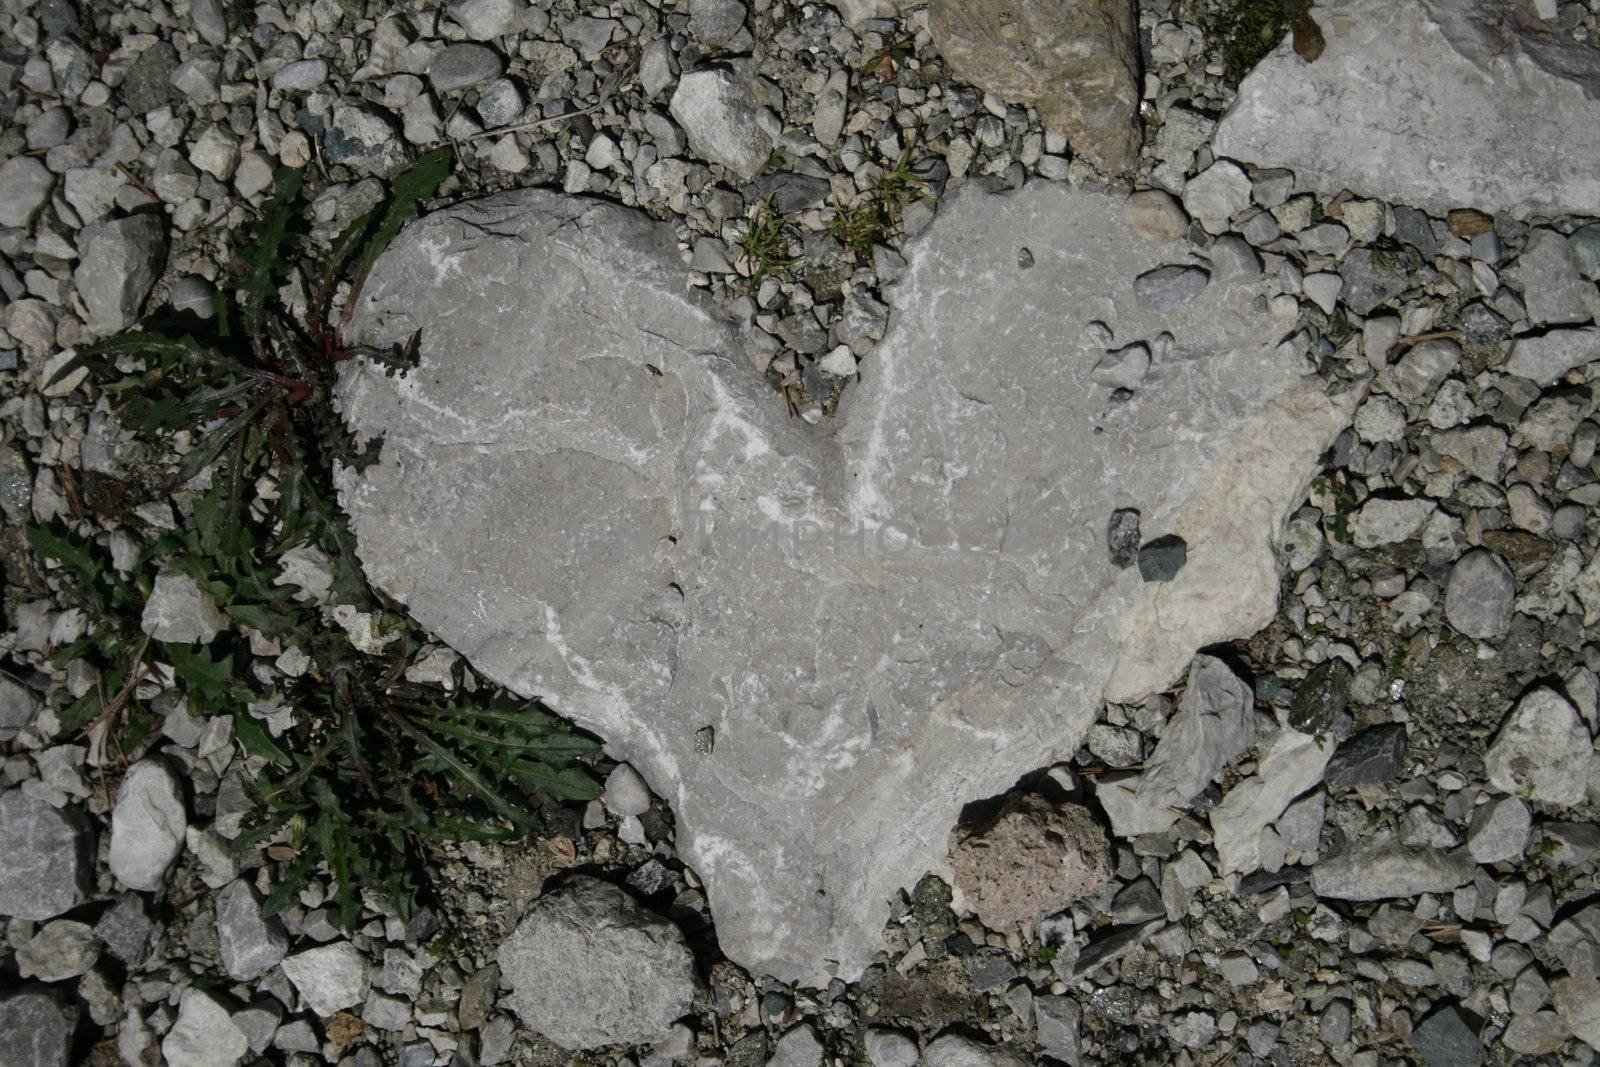 Stone heart in the middle on a walking way in the alps